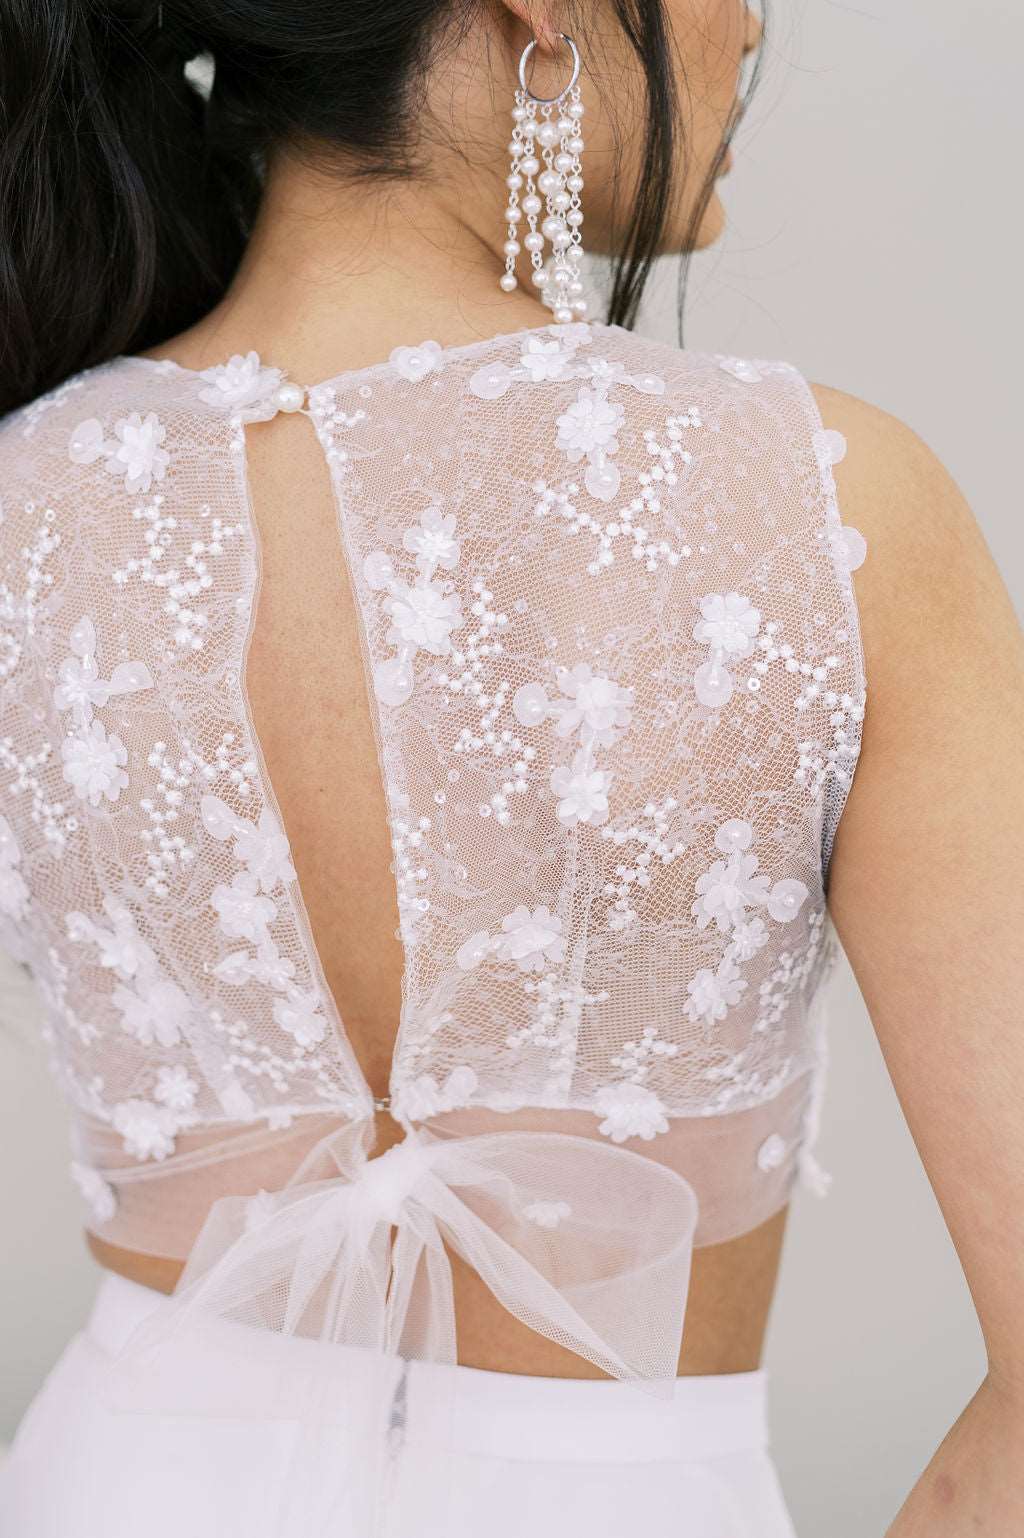 Chic whimsical bridal topper. Lace at back, crepe front. By Catherine Langlois, Toronto, Canada.